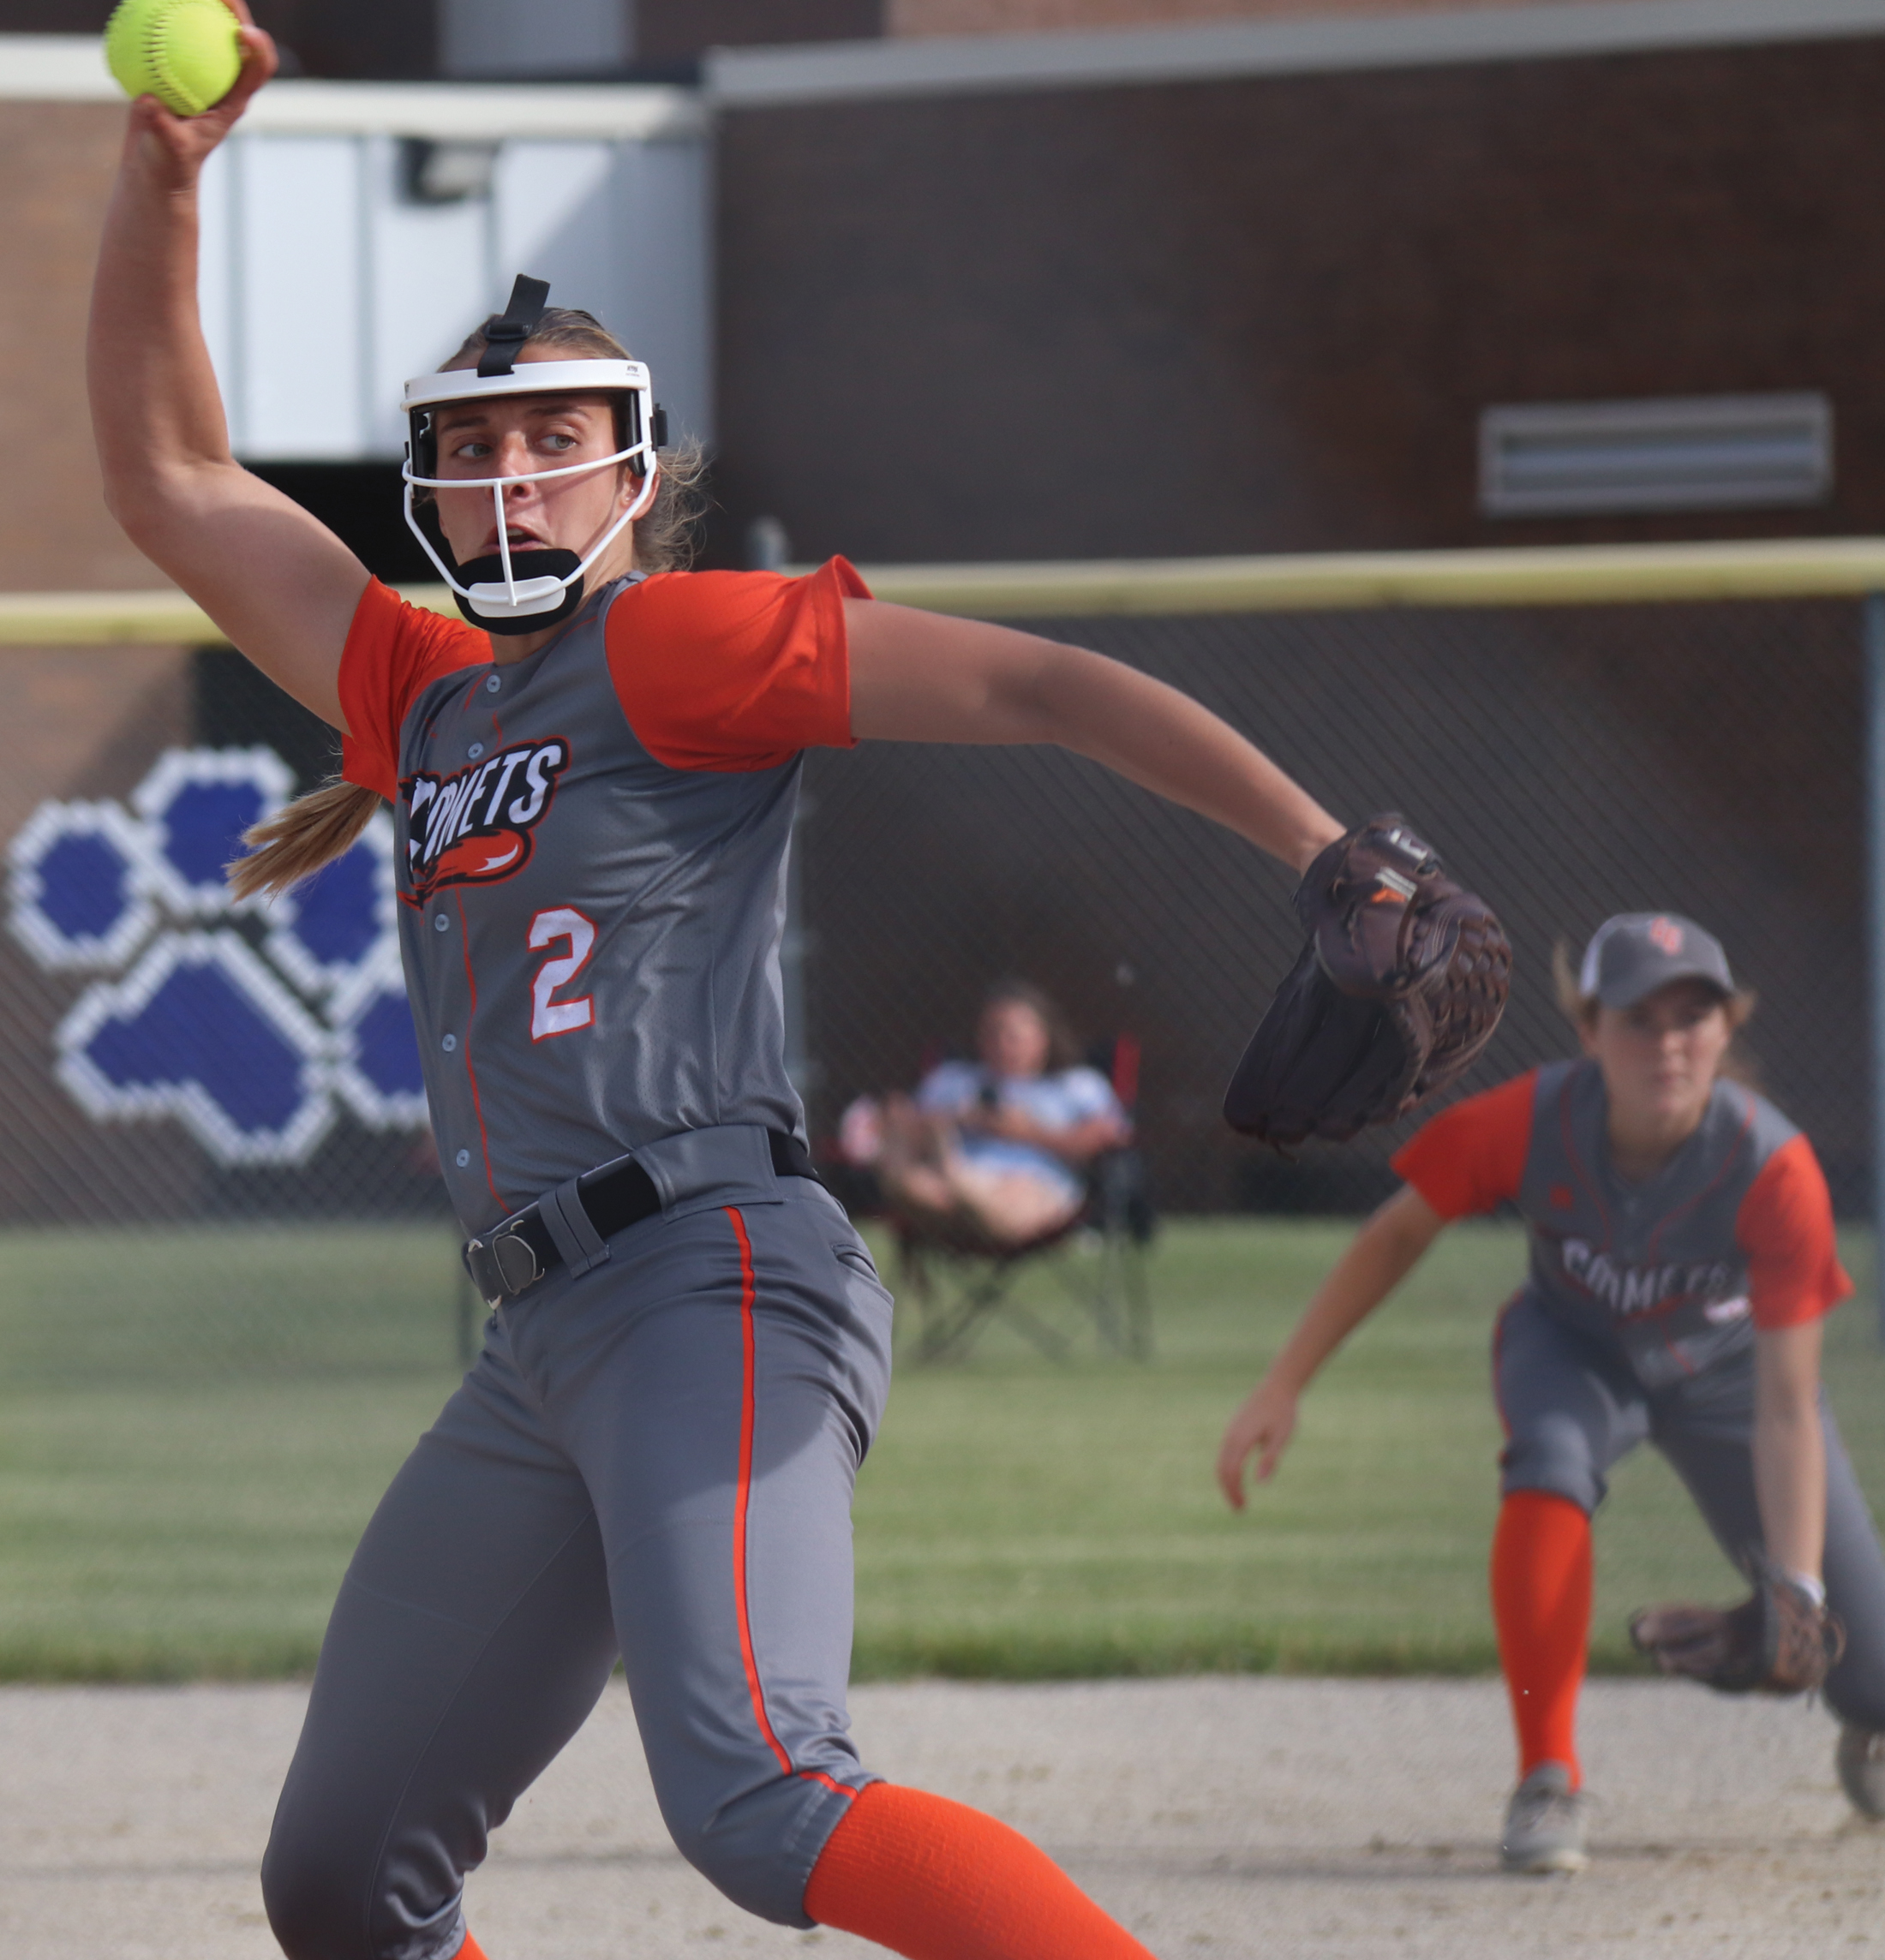 Undefeated Comets win 25th; Heyer whiffs 800th